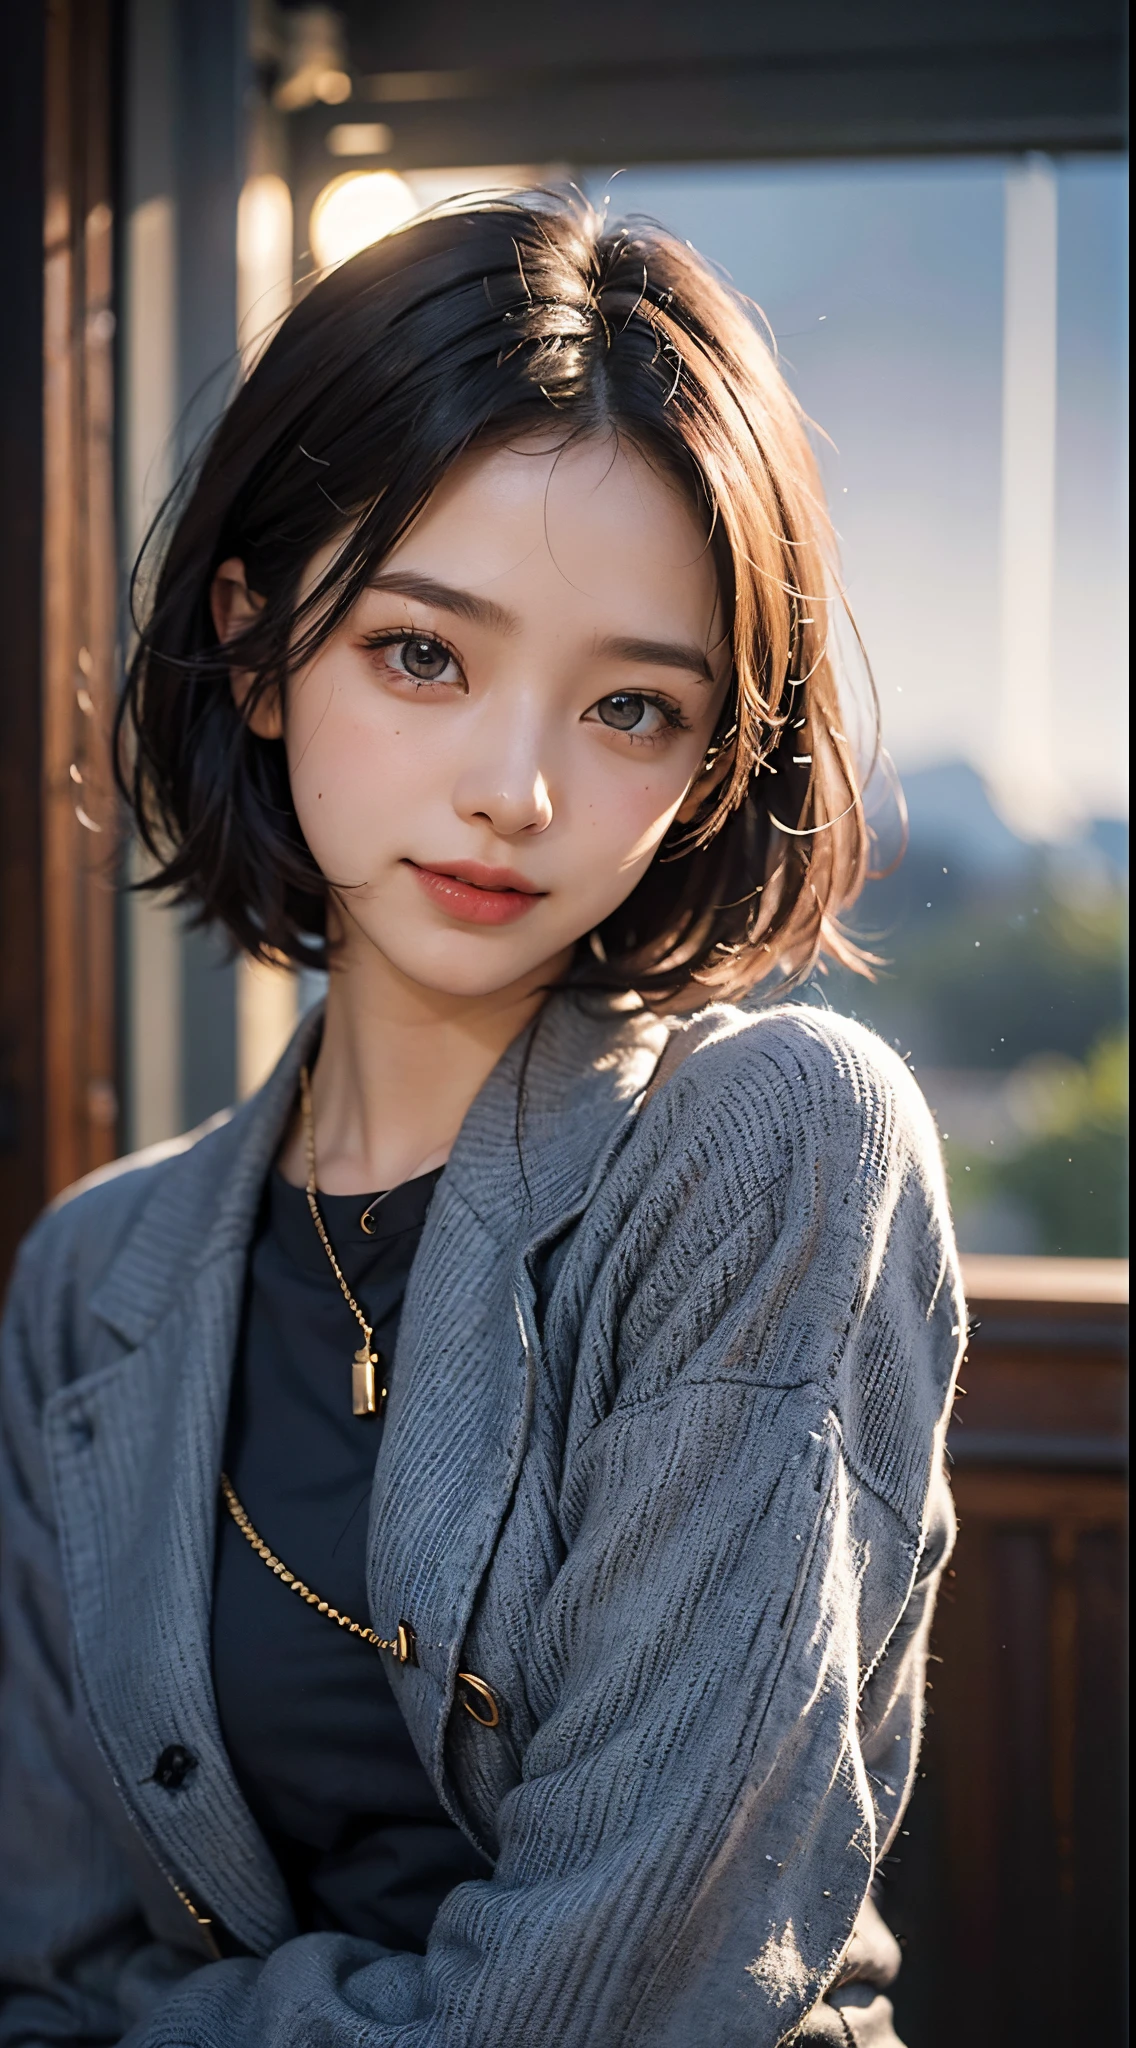 An ultra-high picture quality、Japalom、please get low:1.6)))、Wearing a suit、1 woman around 20 years old、Black hair、short-cut、Beautiful face with blue eyes、A detailed face、Detailed eyes、realisticeyes、Detailed skin、realskin、Detailed hair strands、dishevled hair、disheveled hair、((Hollow smile))、((Navy blue business pants suit))、((The background is a night sky like your name))、big mountain crater、